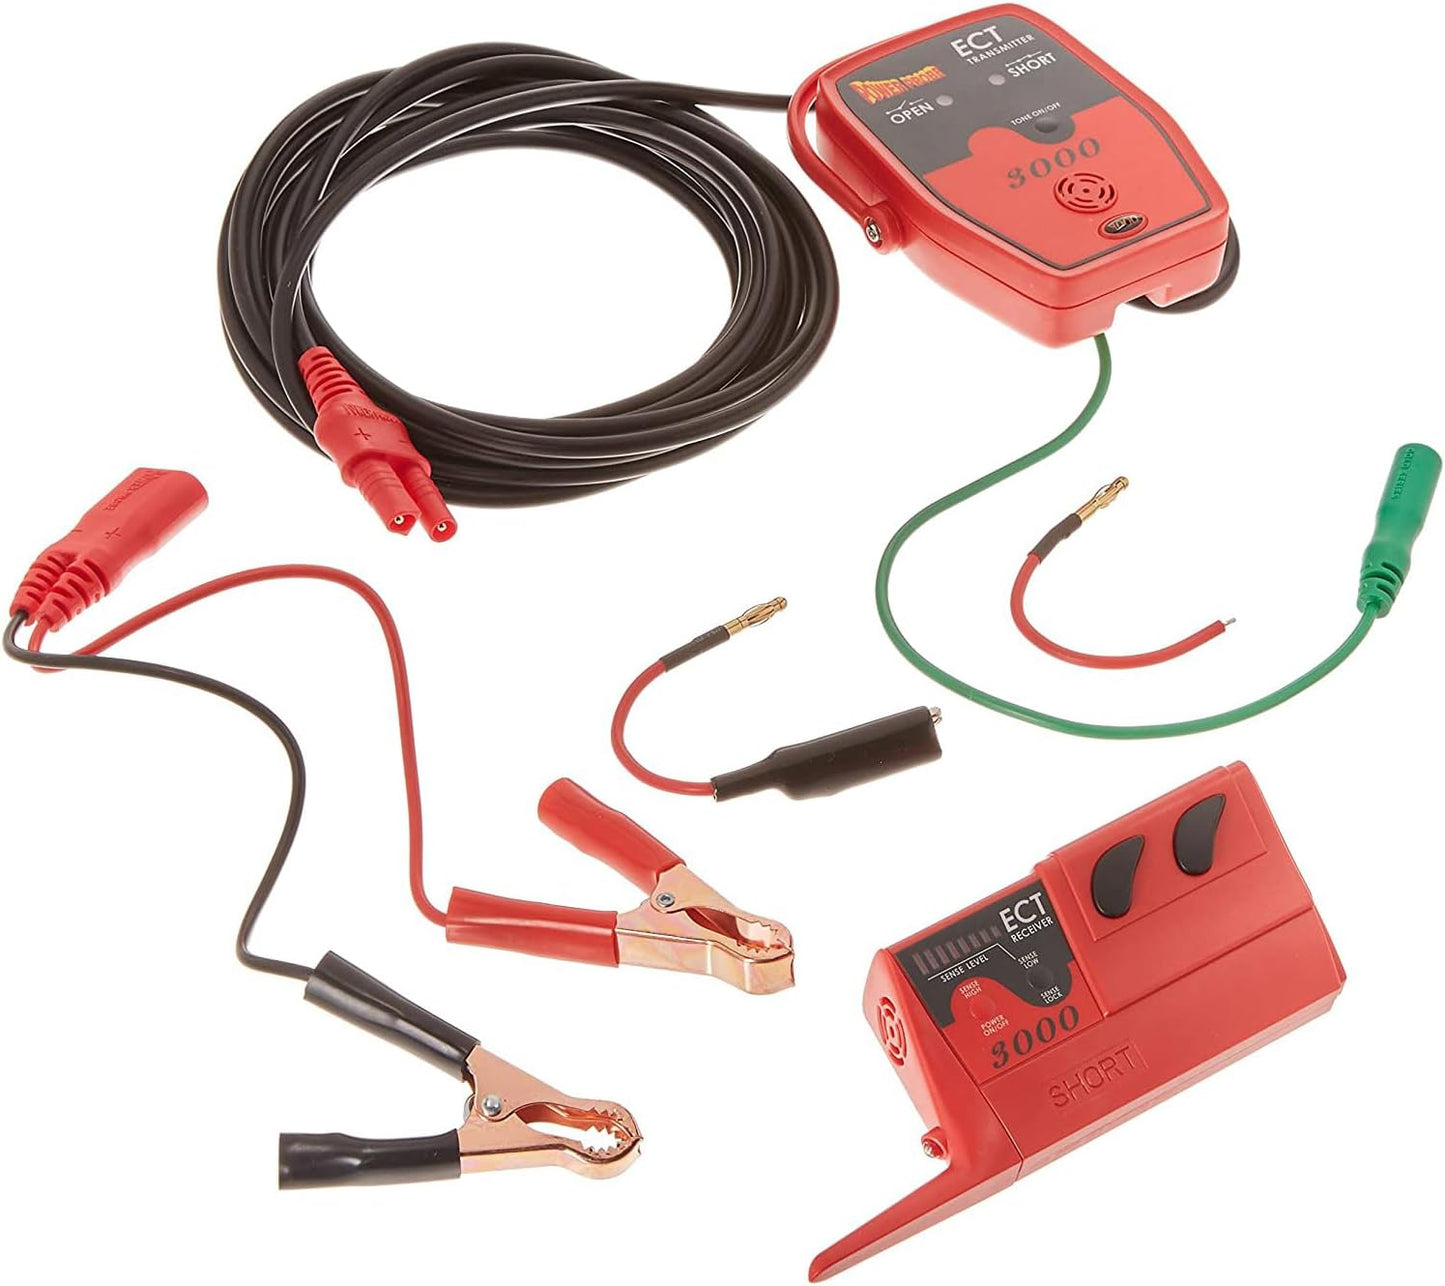 Power Probe Short/Open Circuit Finder NO Box (ECT3000B) [Car Test Tool, Electrical Circuit Tester, Short Circuit Indicator, Open Circuit Tracer]